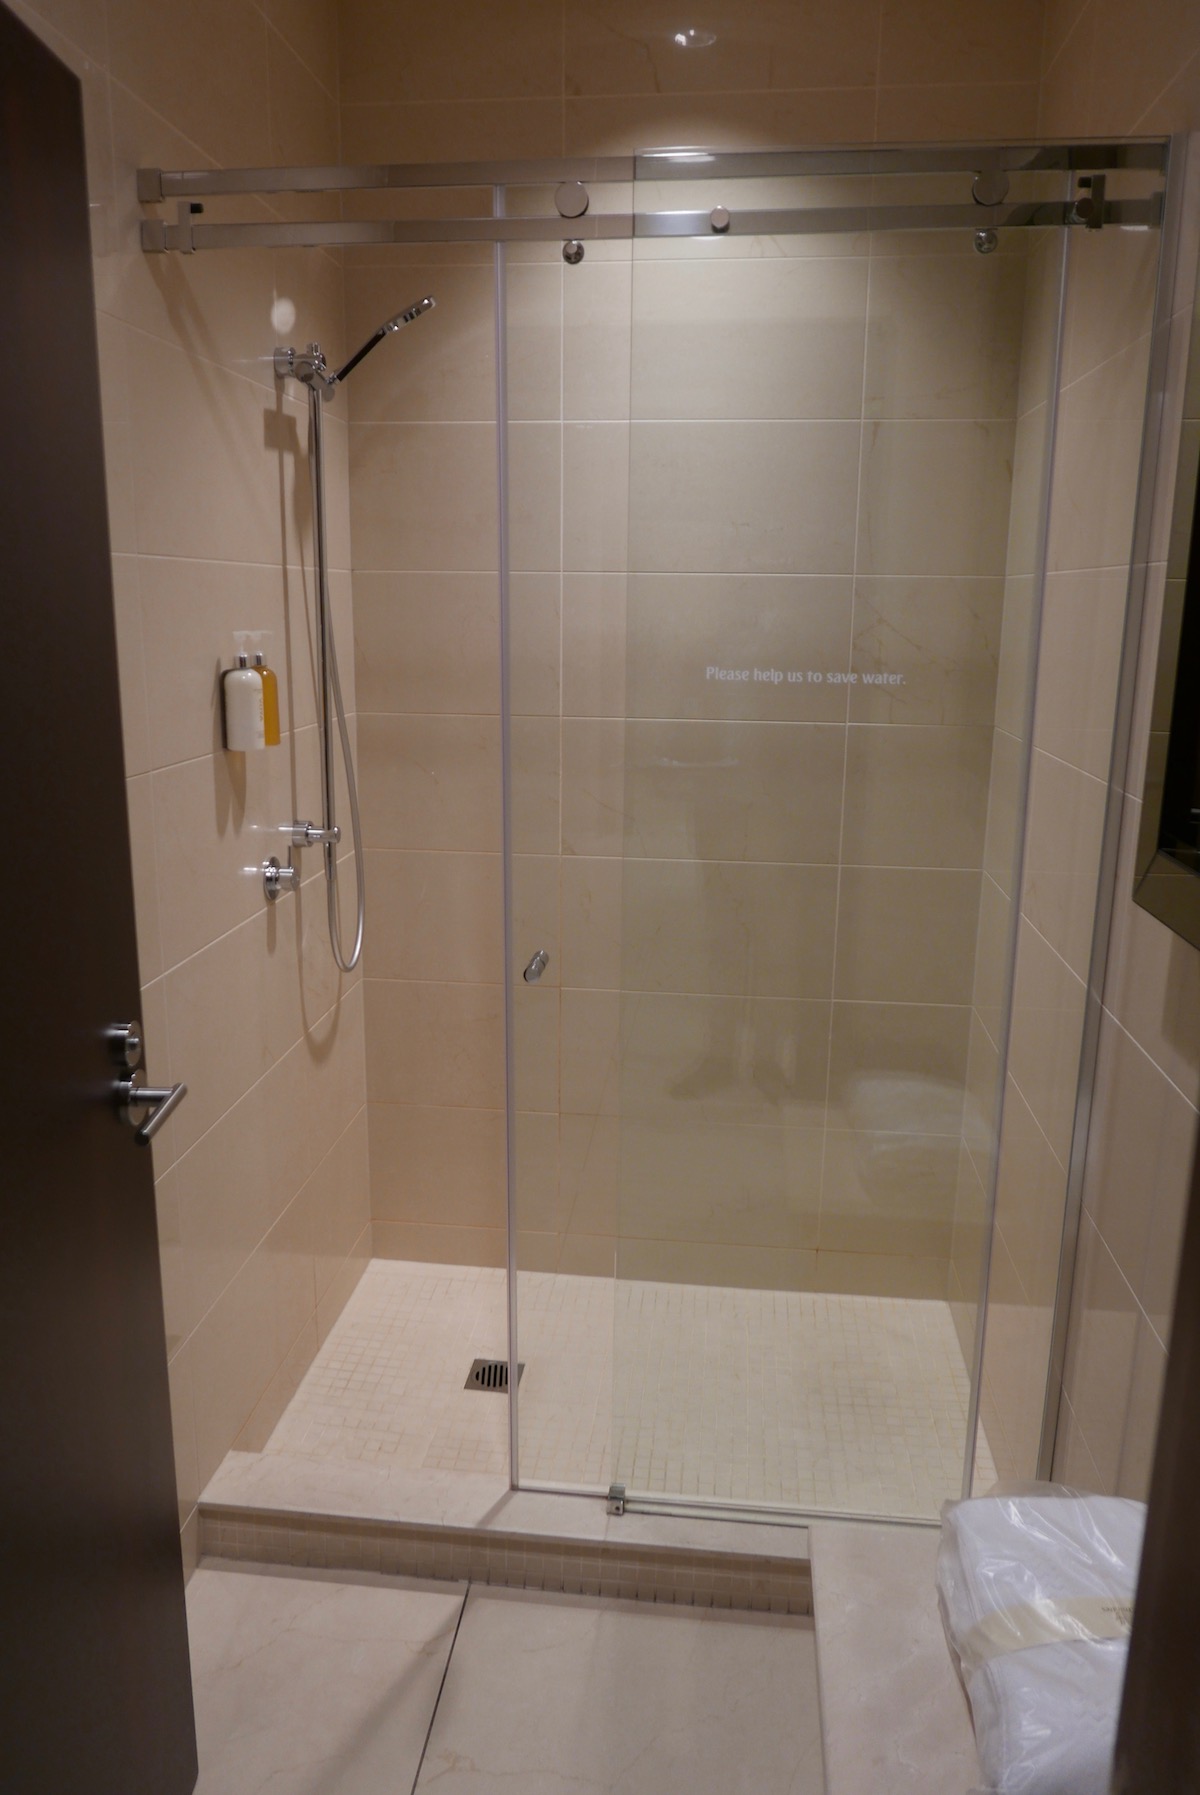 The Emirates Business & First Class Lounge Melbourne shower